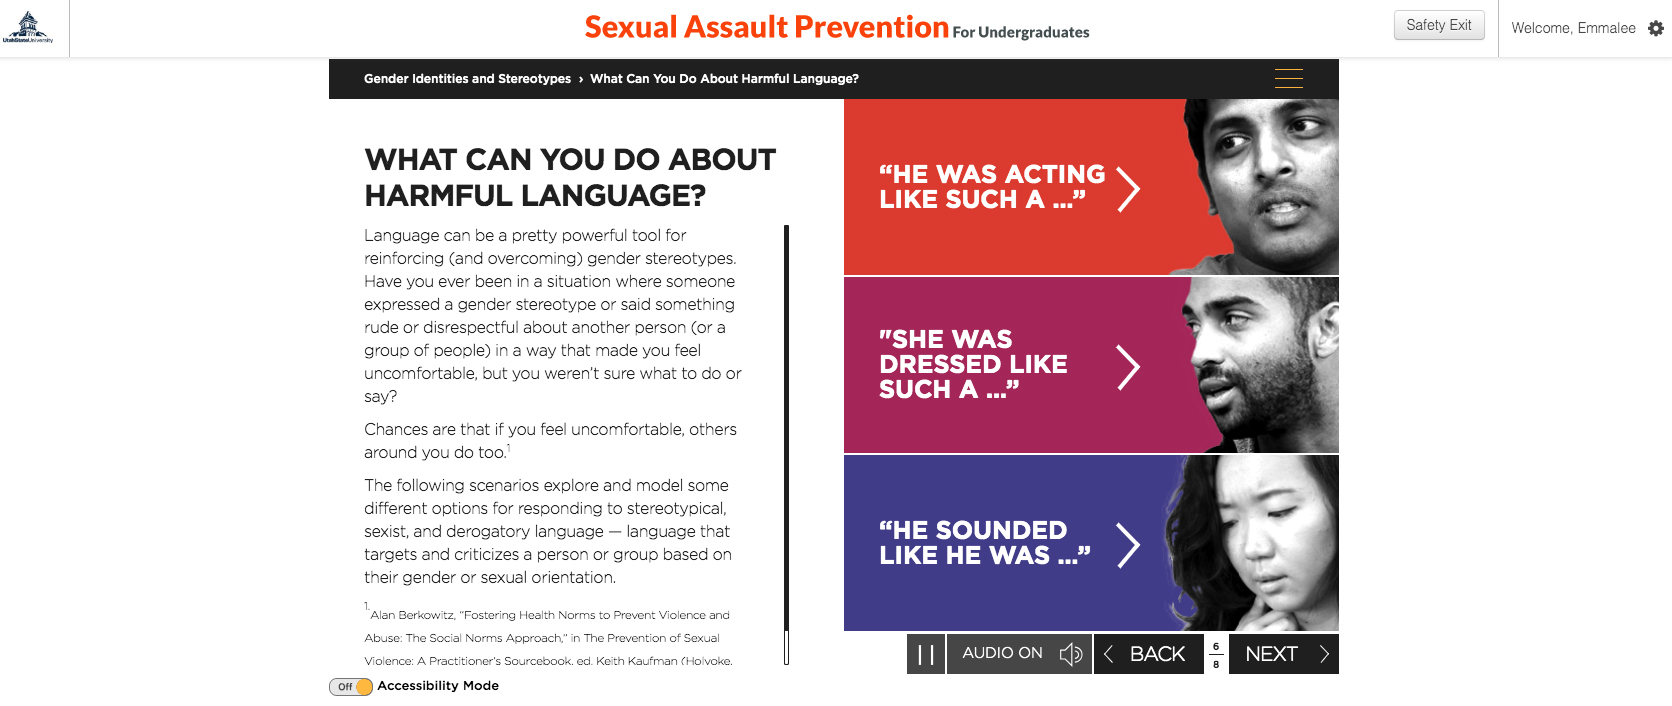 Sexual Assault Prevention course landing page